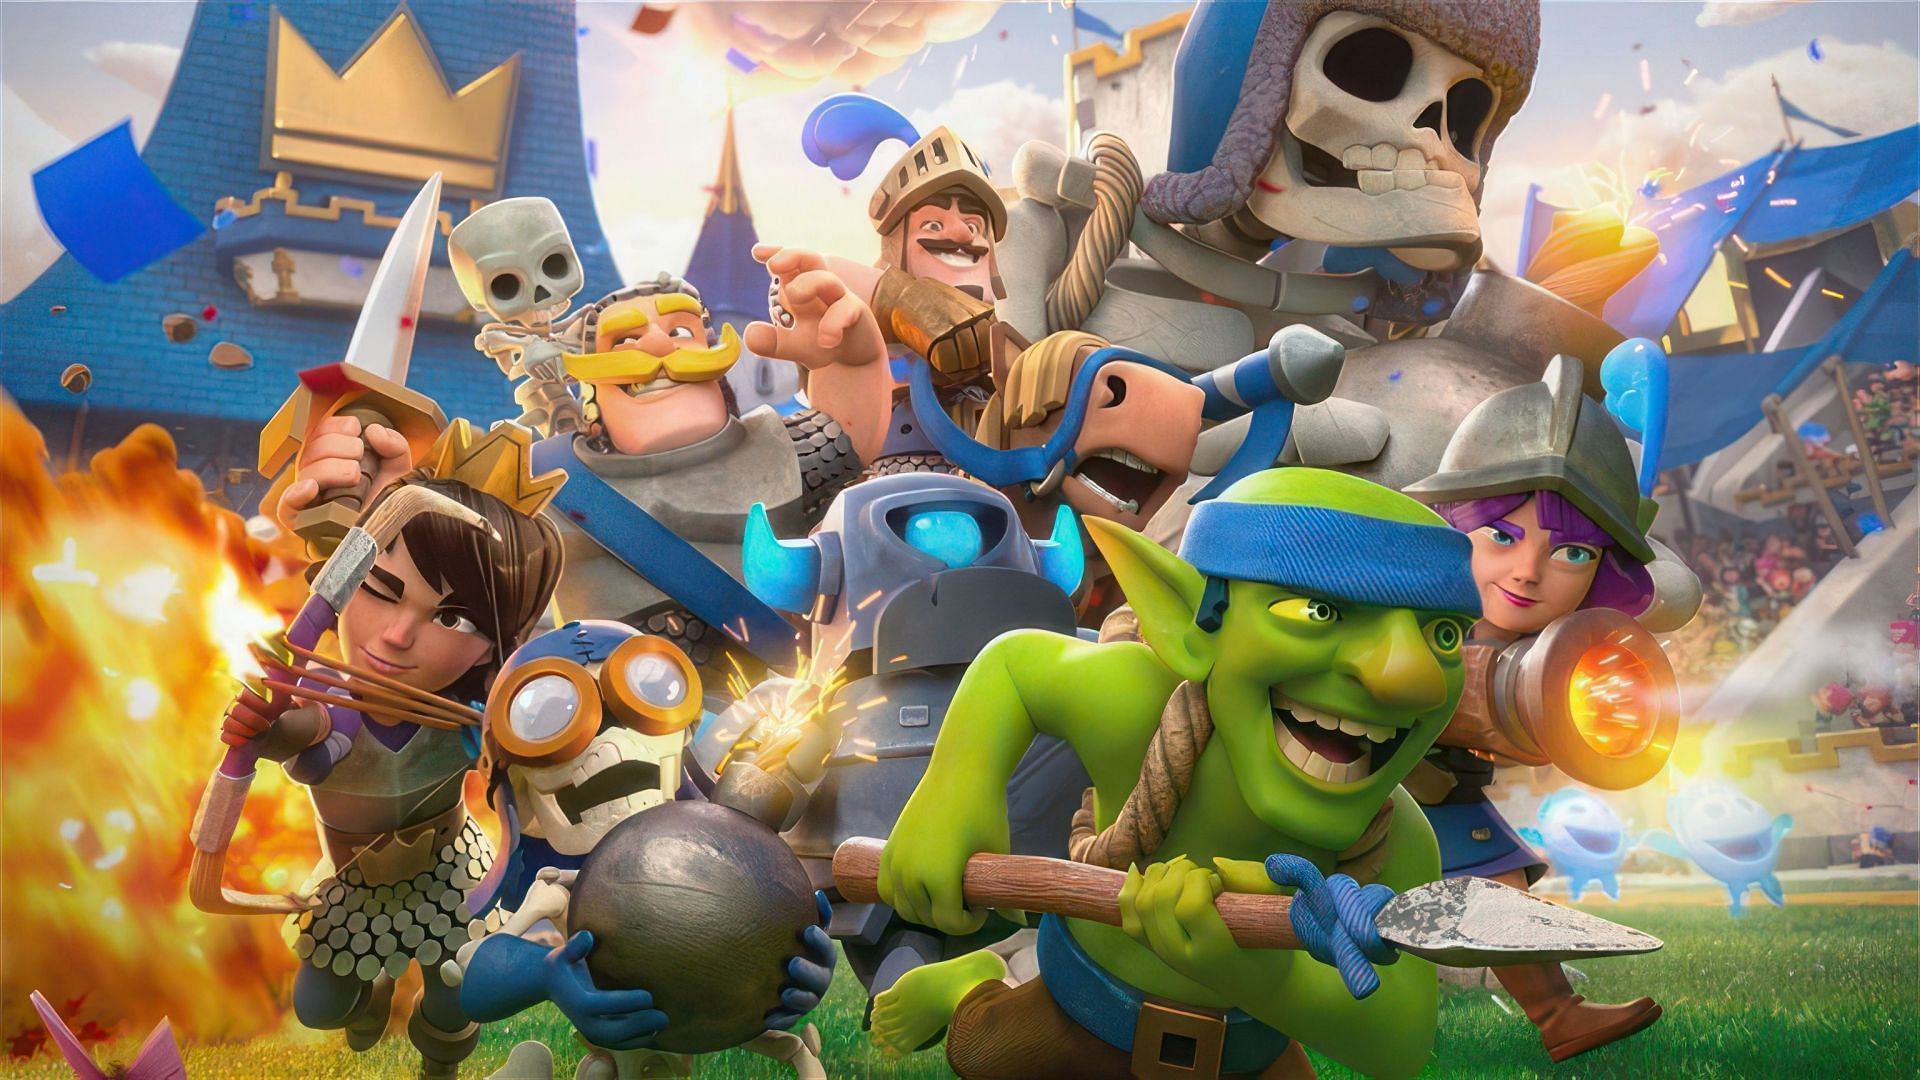 Official artwork for the game (Image via Supercell)